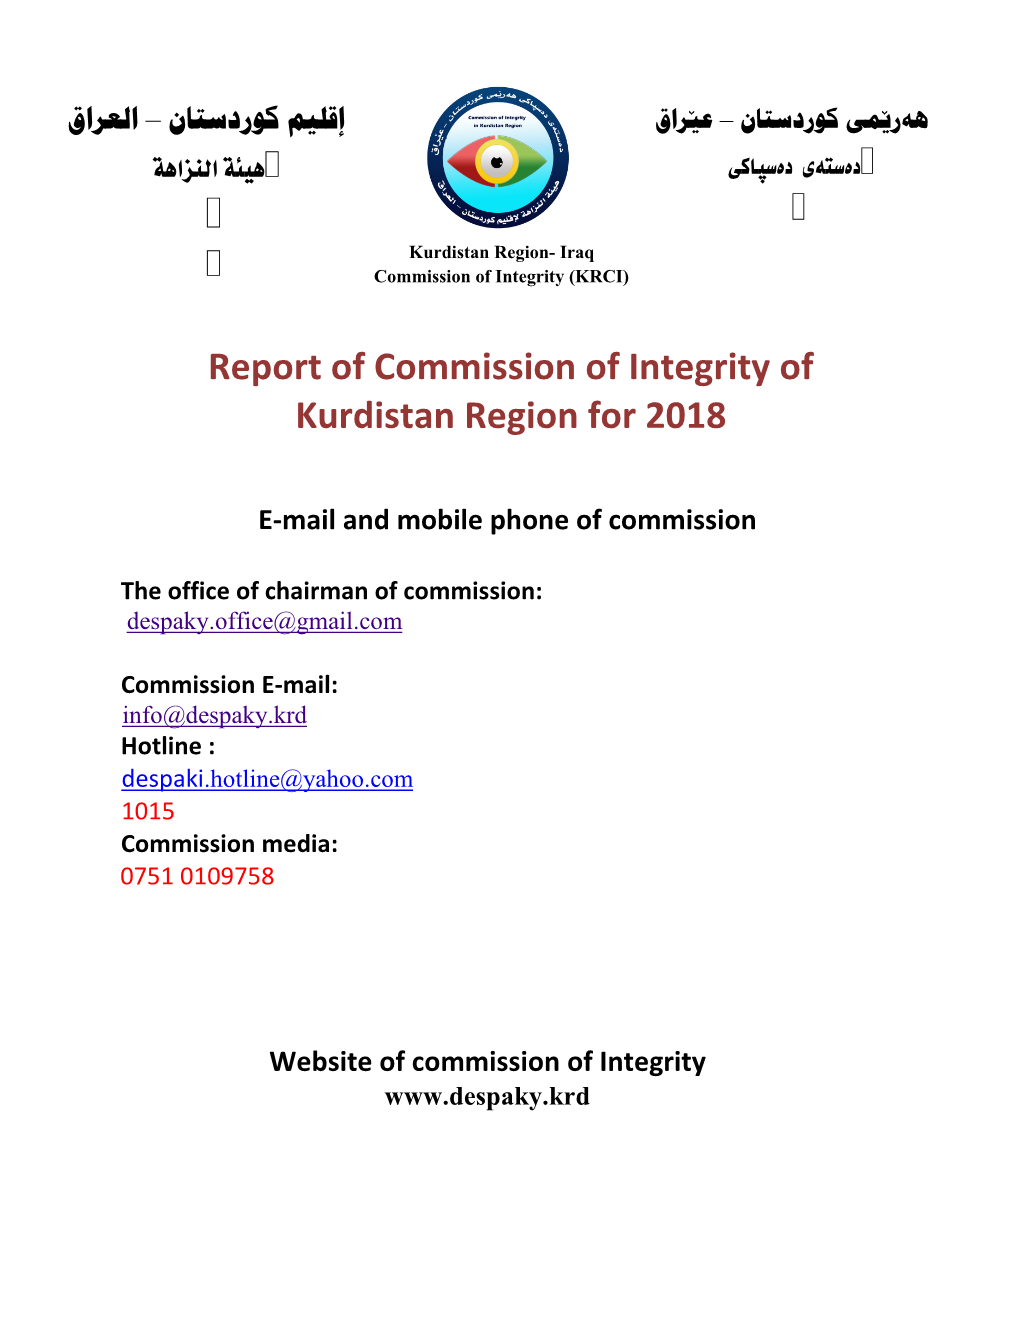 Report of Commission of Integrity of Kurdistan Region for 2018